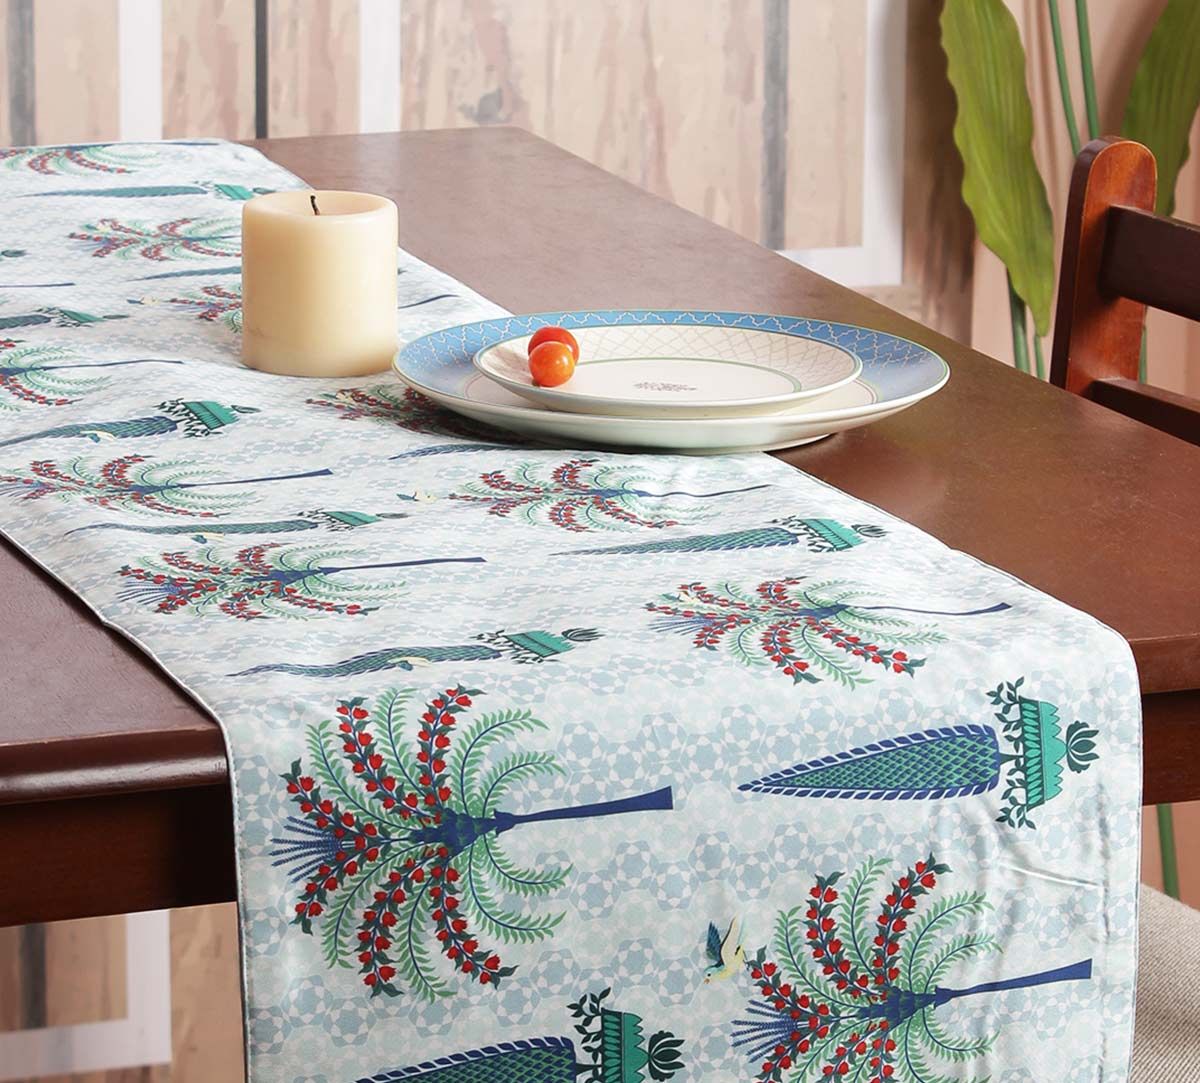 Palm Jumeriah Bed and Table Runner